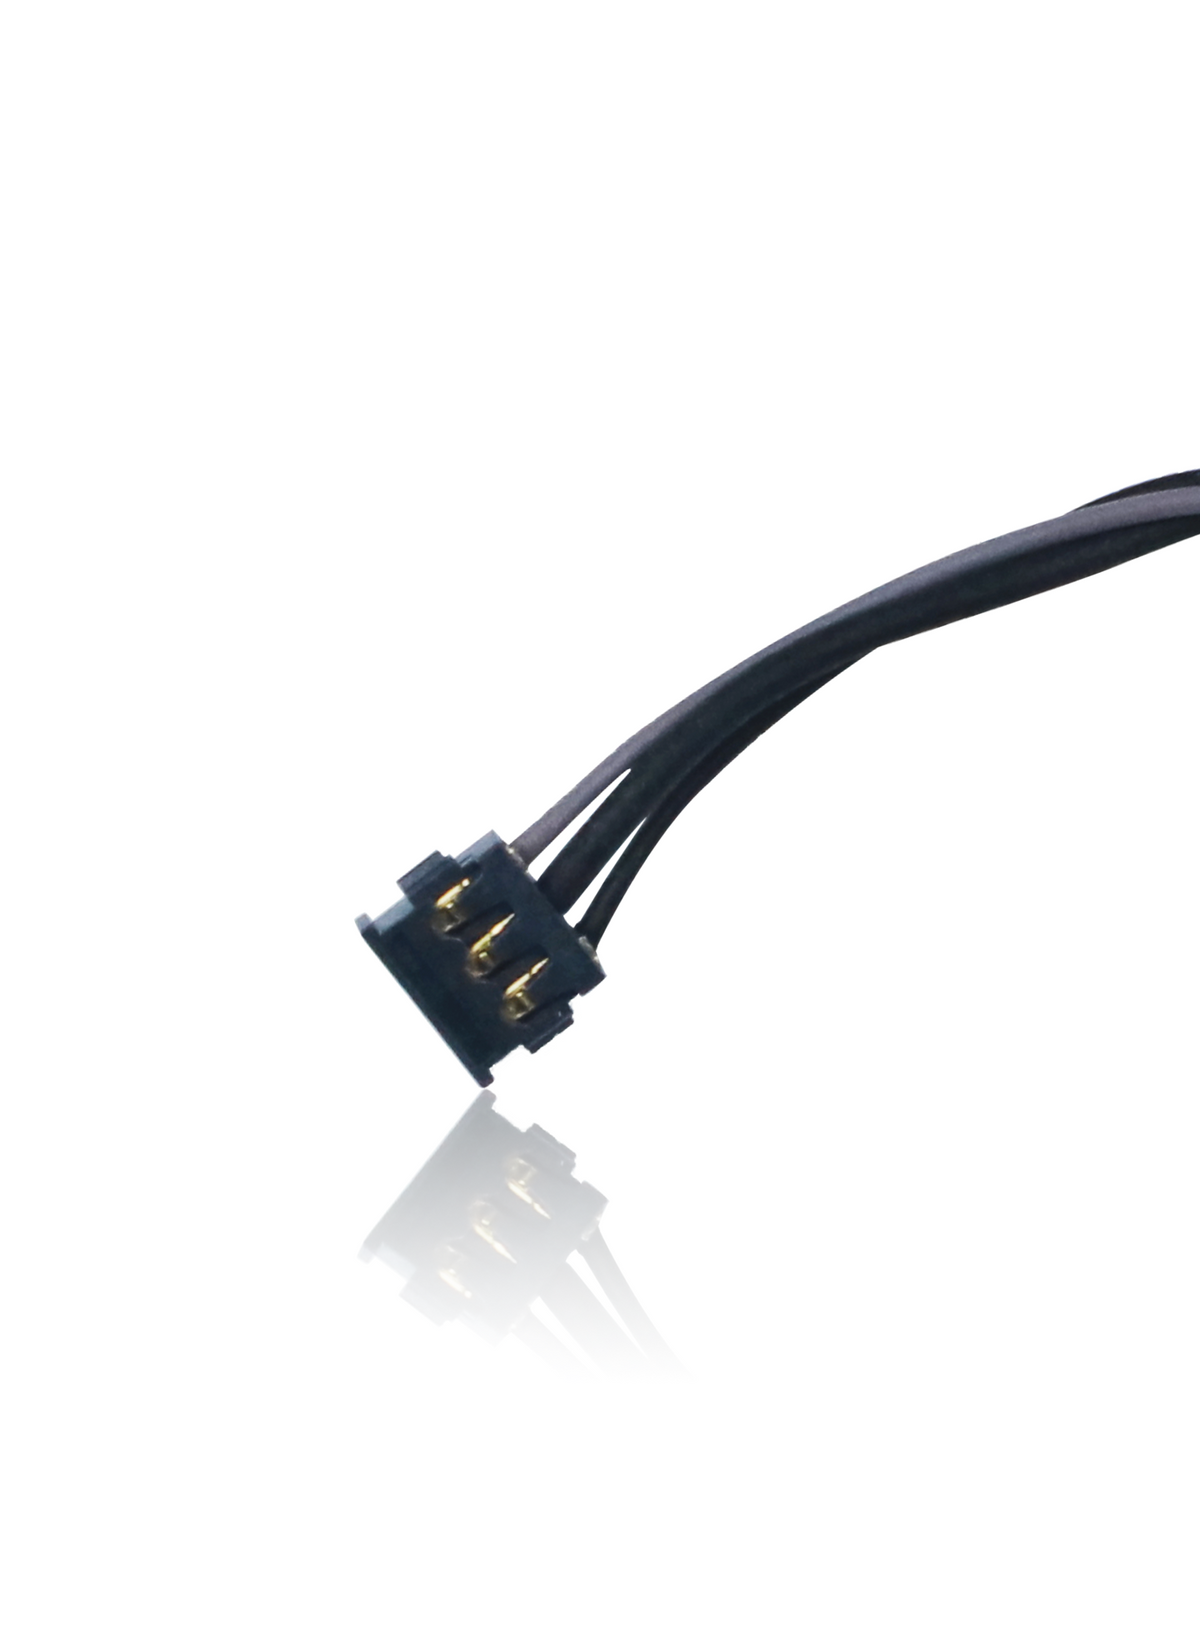 MICROPHONE CABLE COMPATIBLE FOR MACBOOK UNIBODY 13" (A1342 / LATE 2009 / MID 2010)